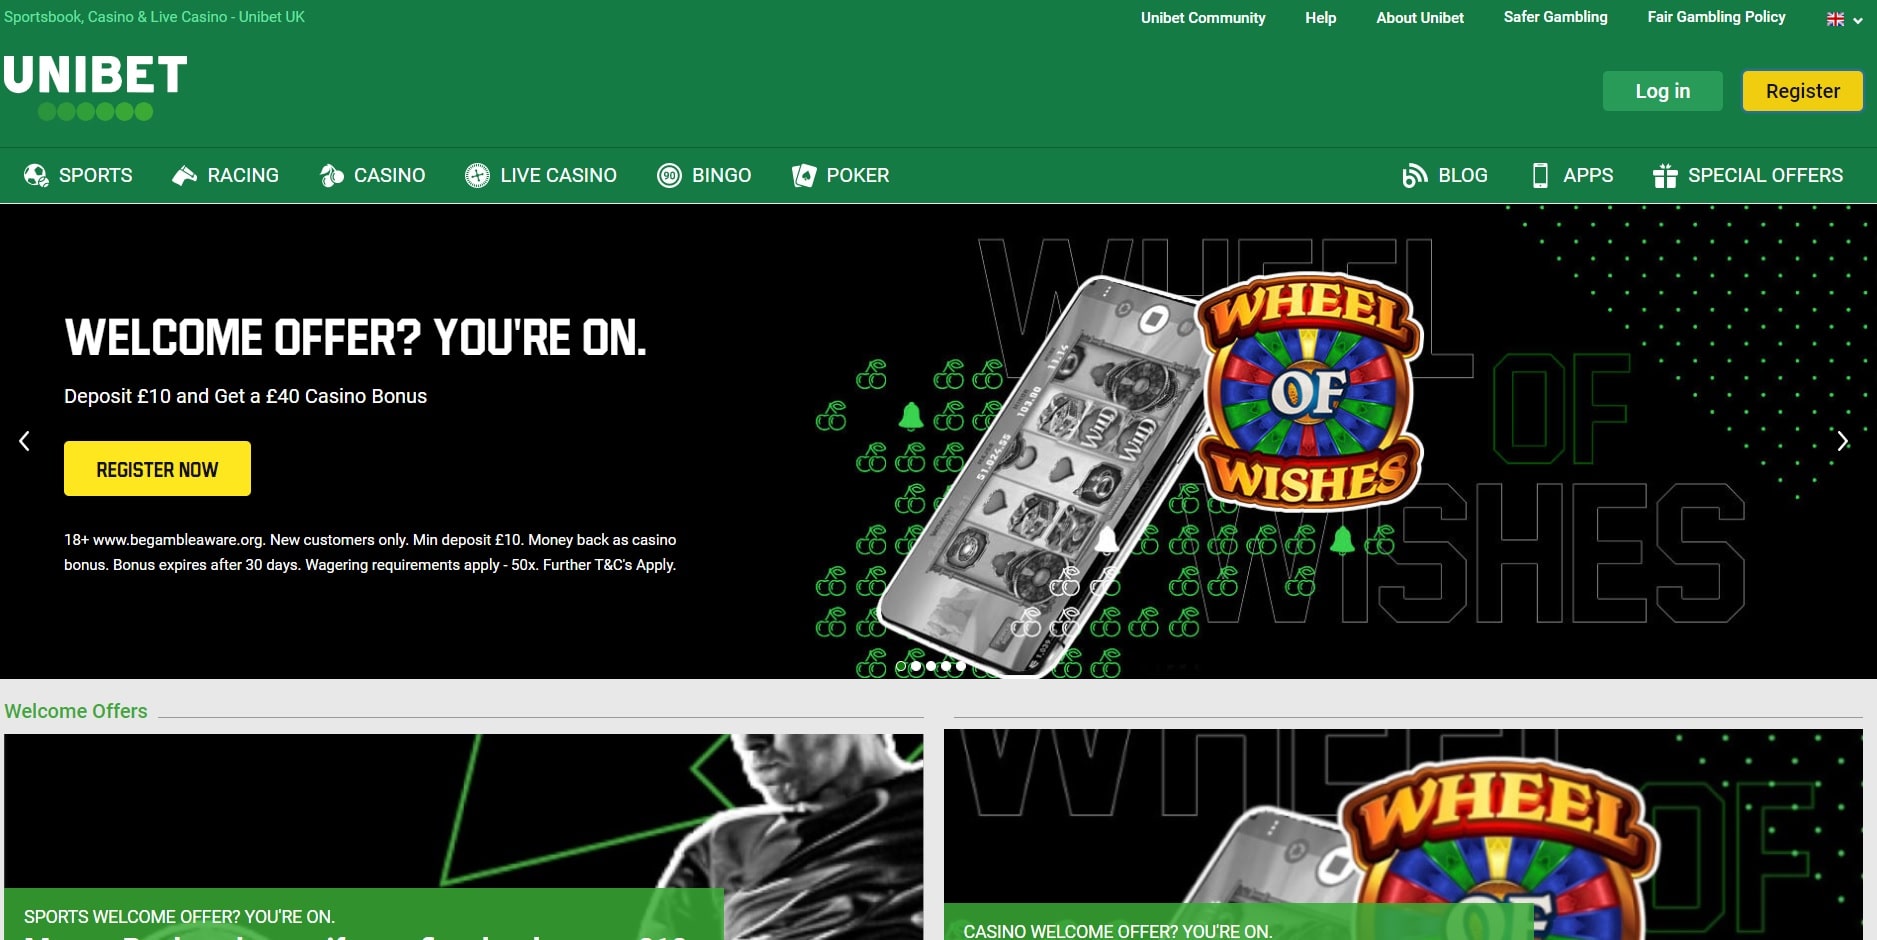 Unibet rugby streaming sites B min